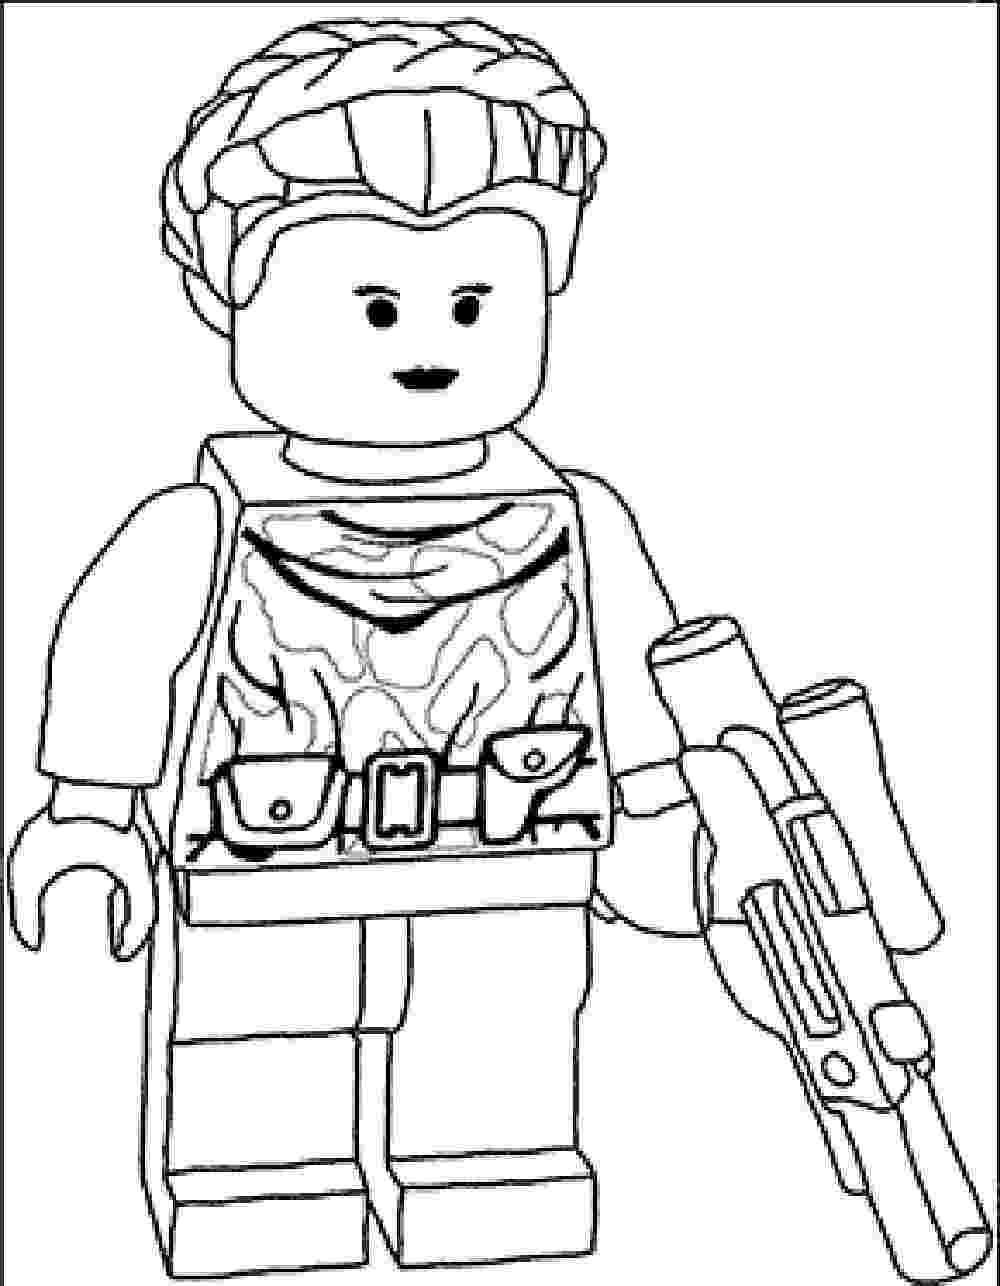 lego star wars coloring pages printable lego star wars coloring pages best coloring pages for kids star printable pages wars coloring lego 